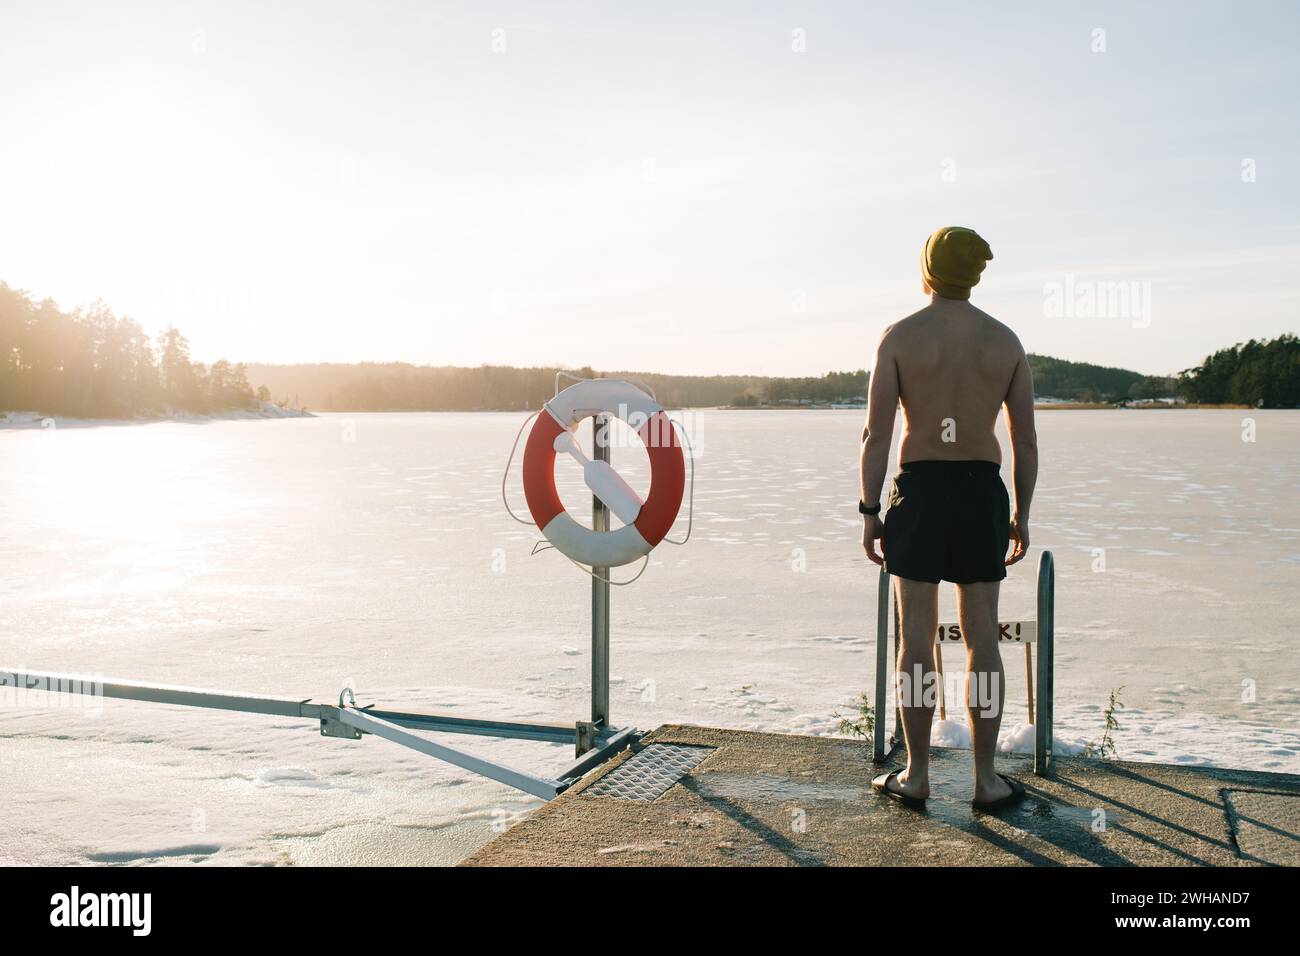 man standing getting some vitamin D before taking an ice bath Stock Photo